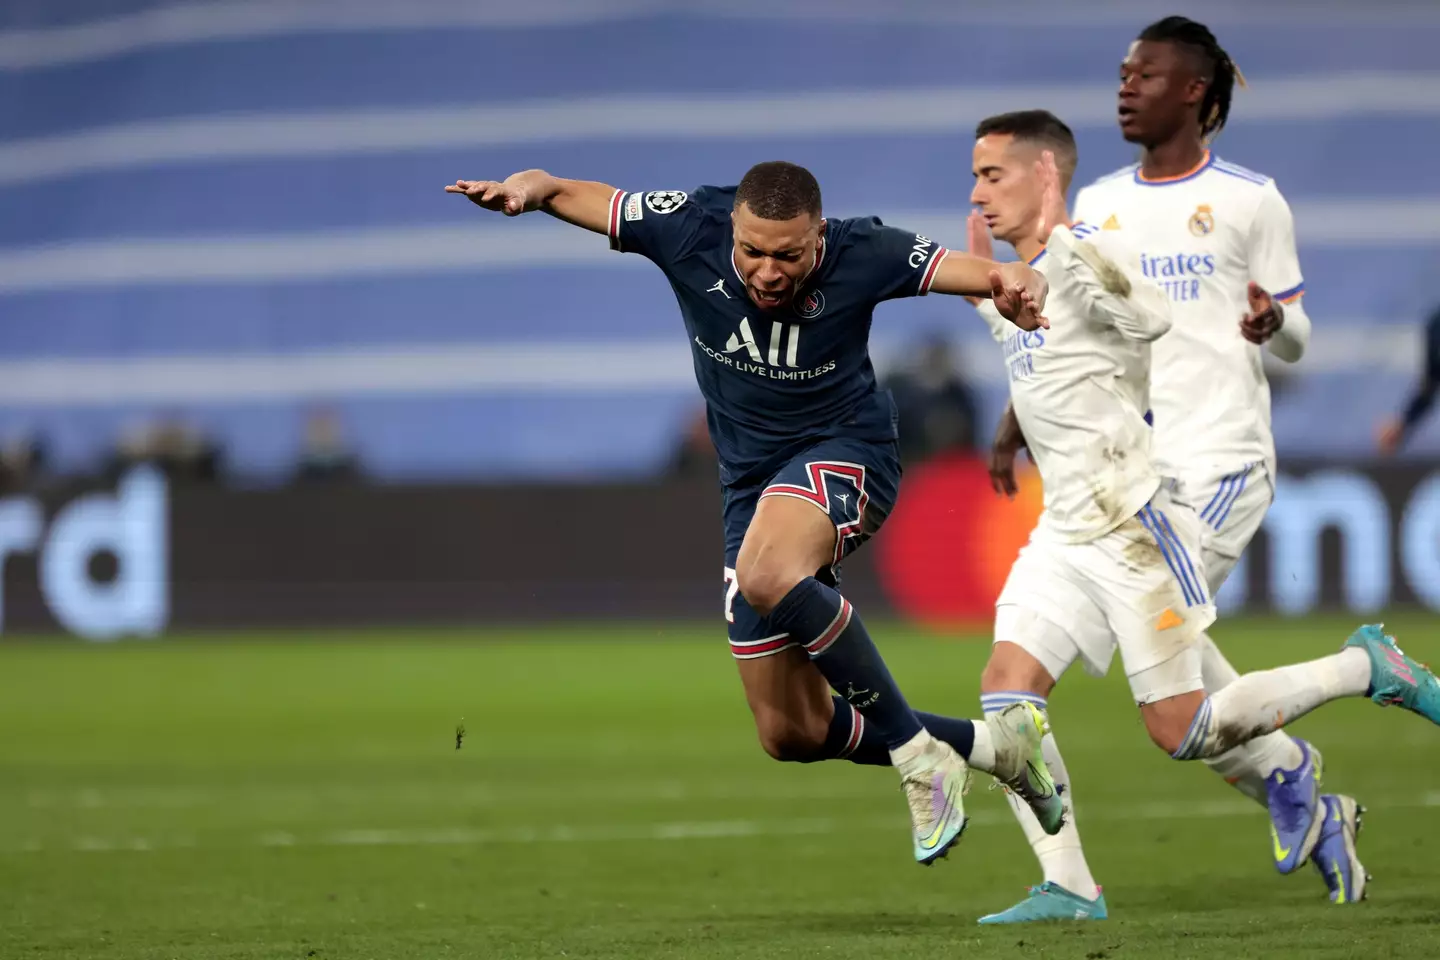 Kylian Mbappe faced Real Madrid this season in the Champions League. Image